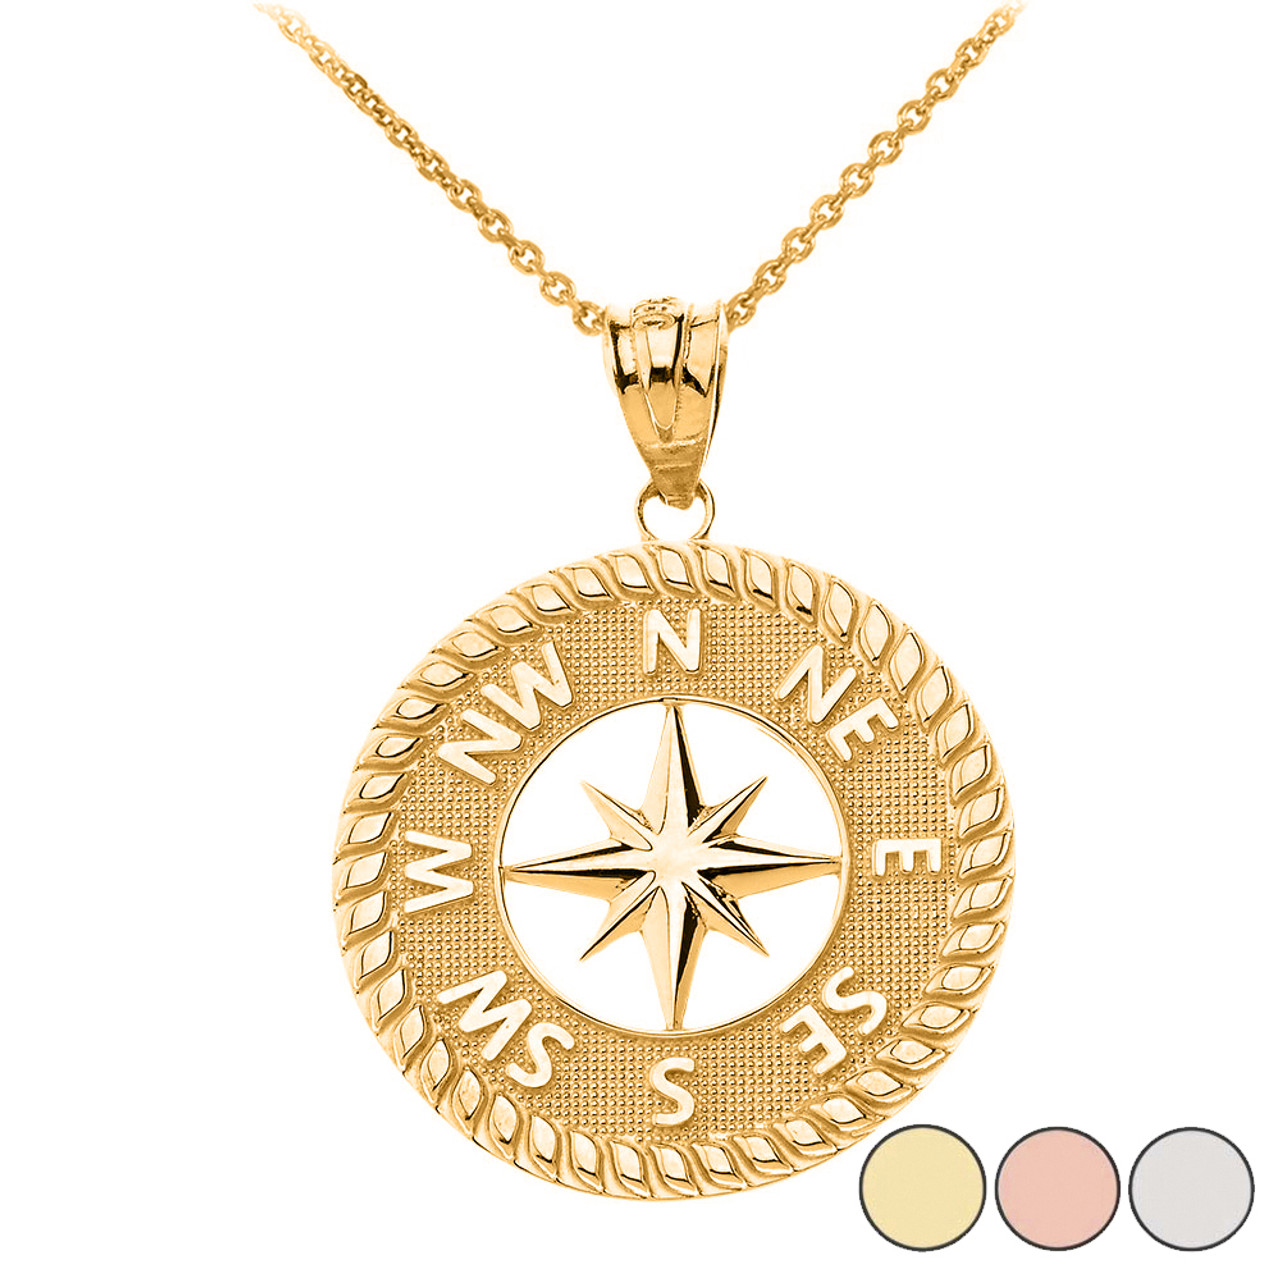 Navigation Compass Pendant Necklace in Solid Gold (Yellow/Rose/White)